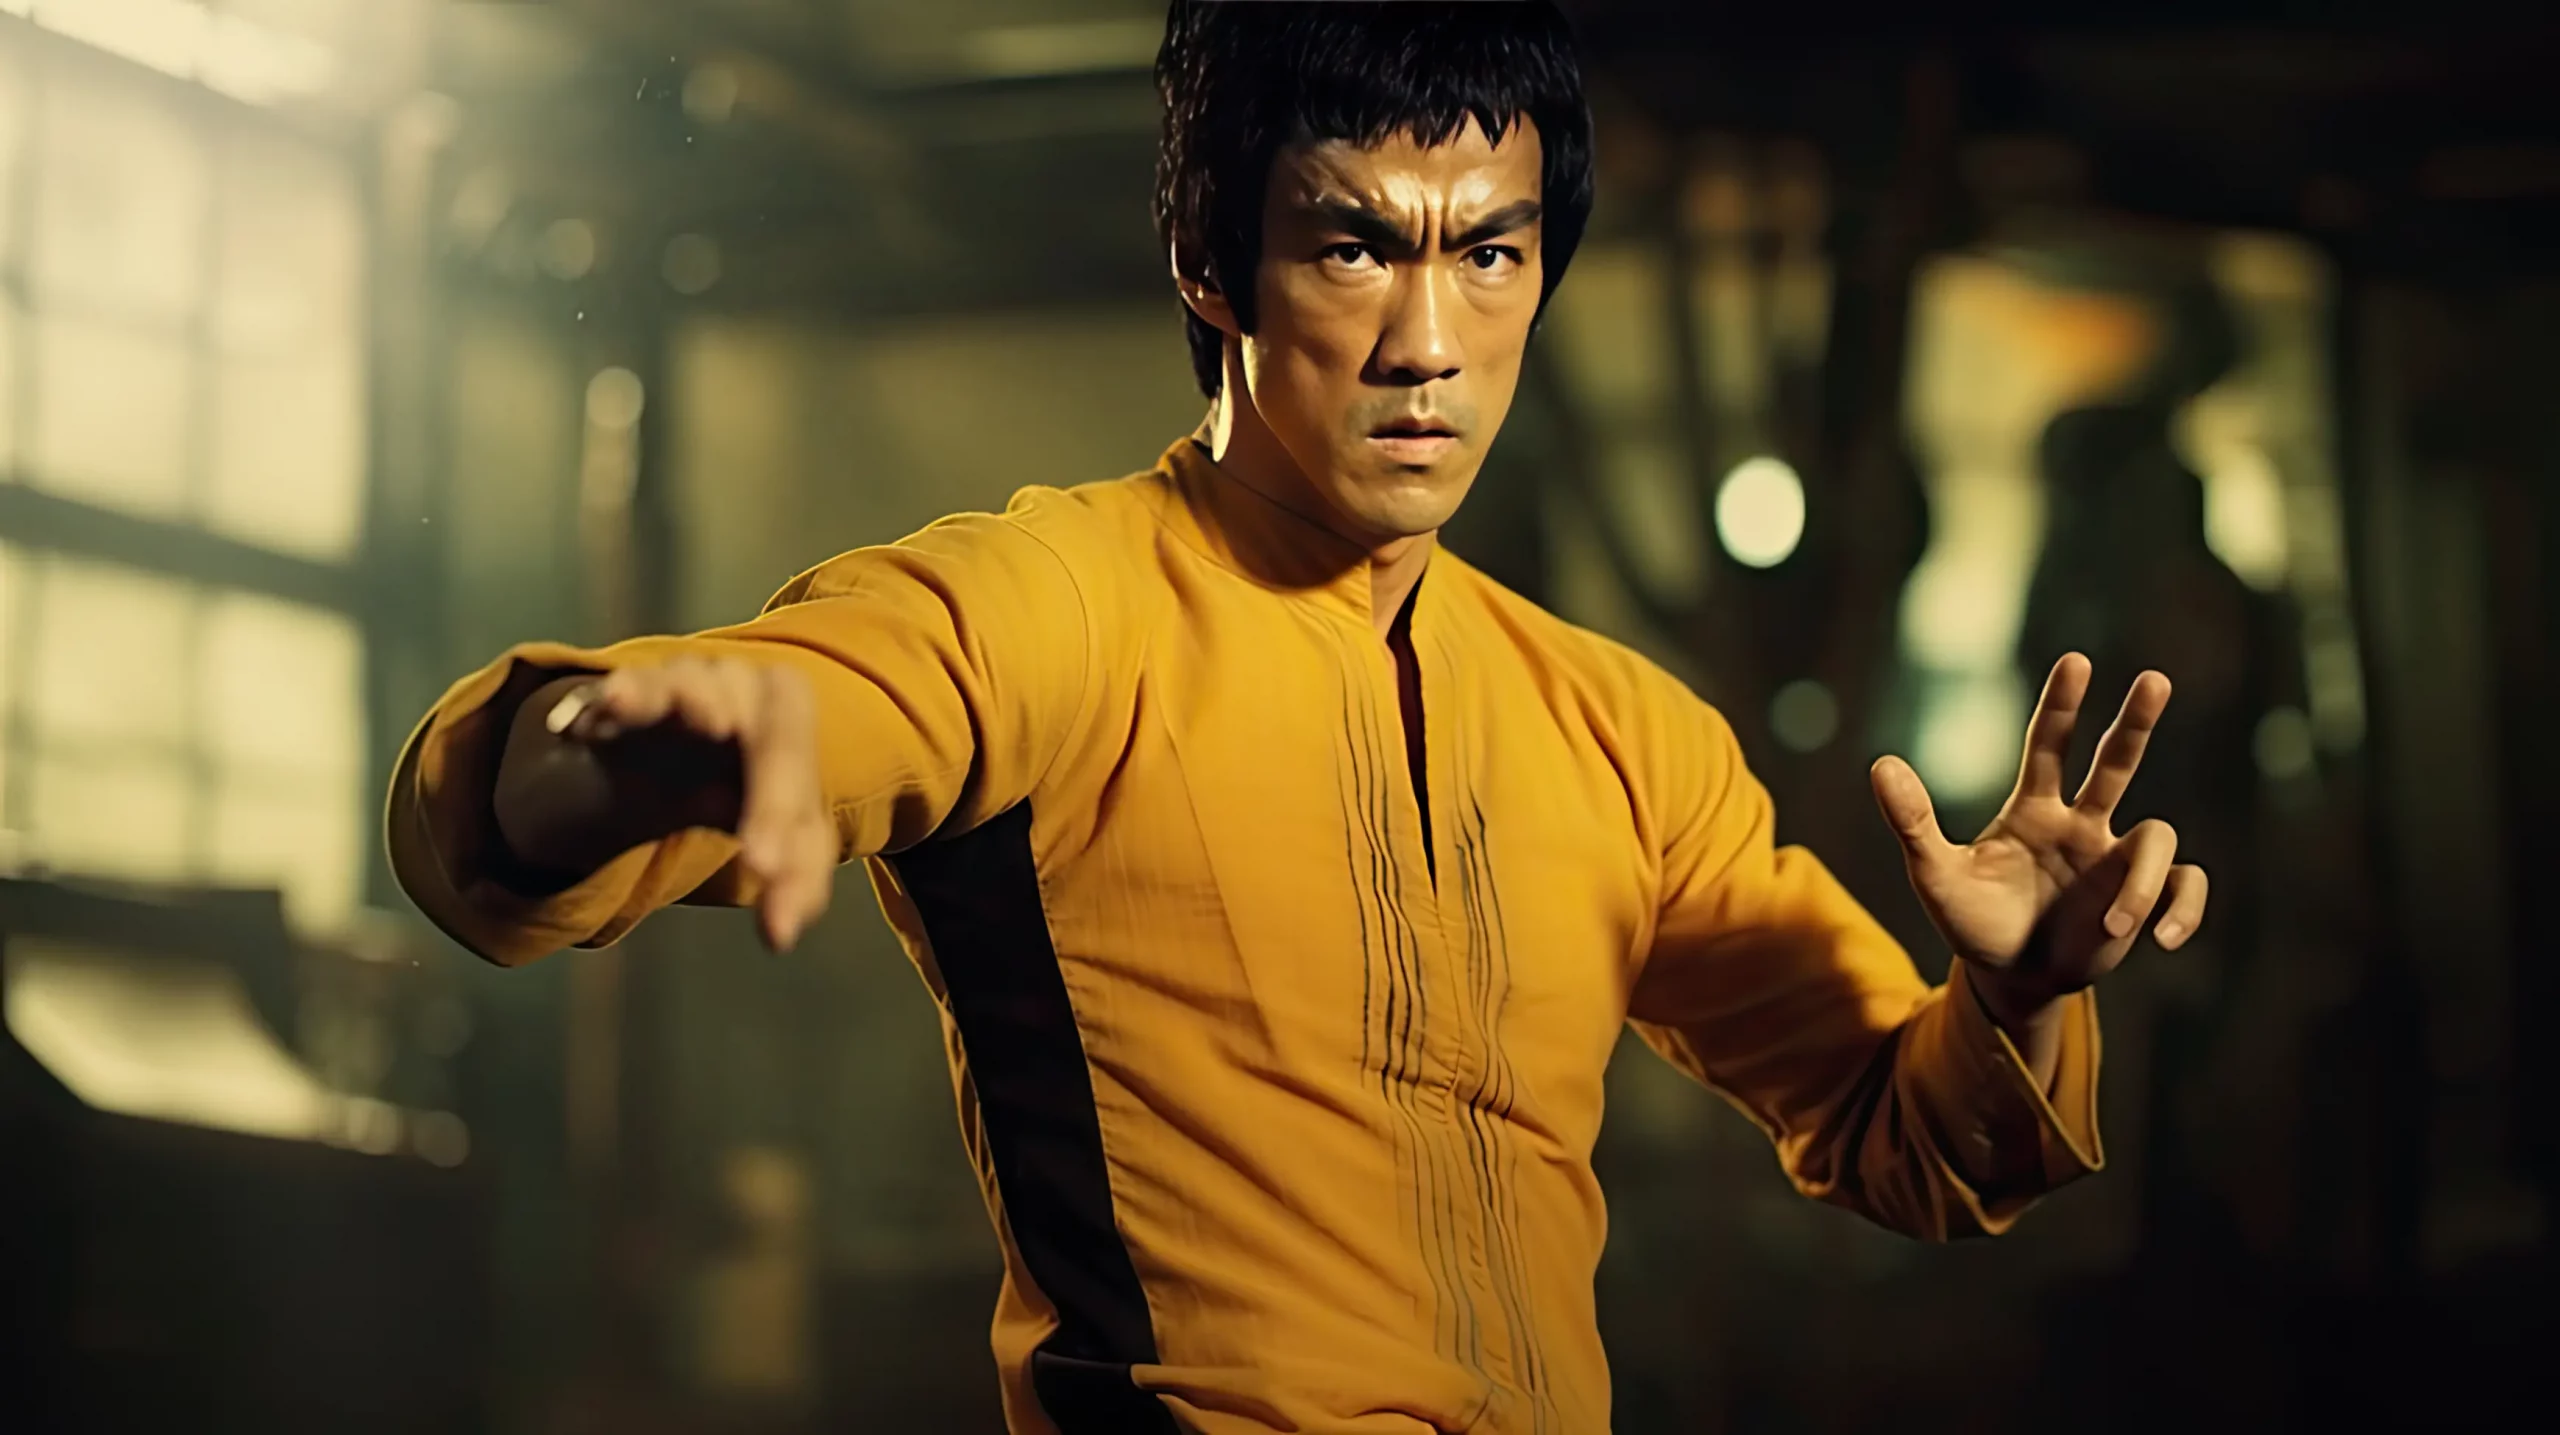 Bruce Lee master of Jeet Kune Do in fighting stance